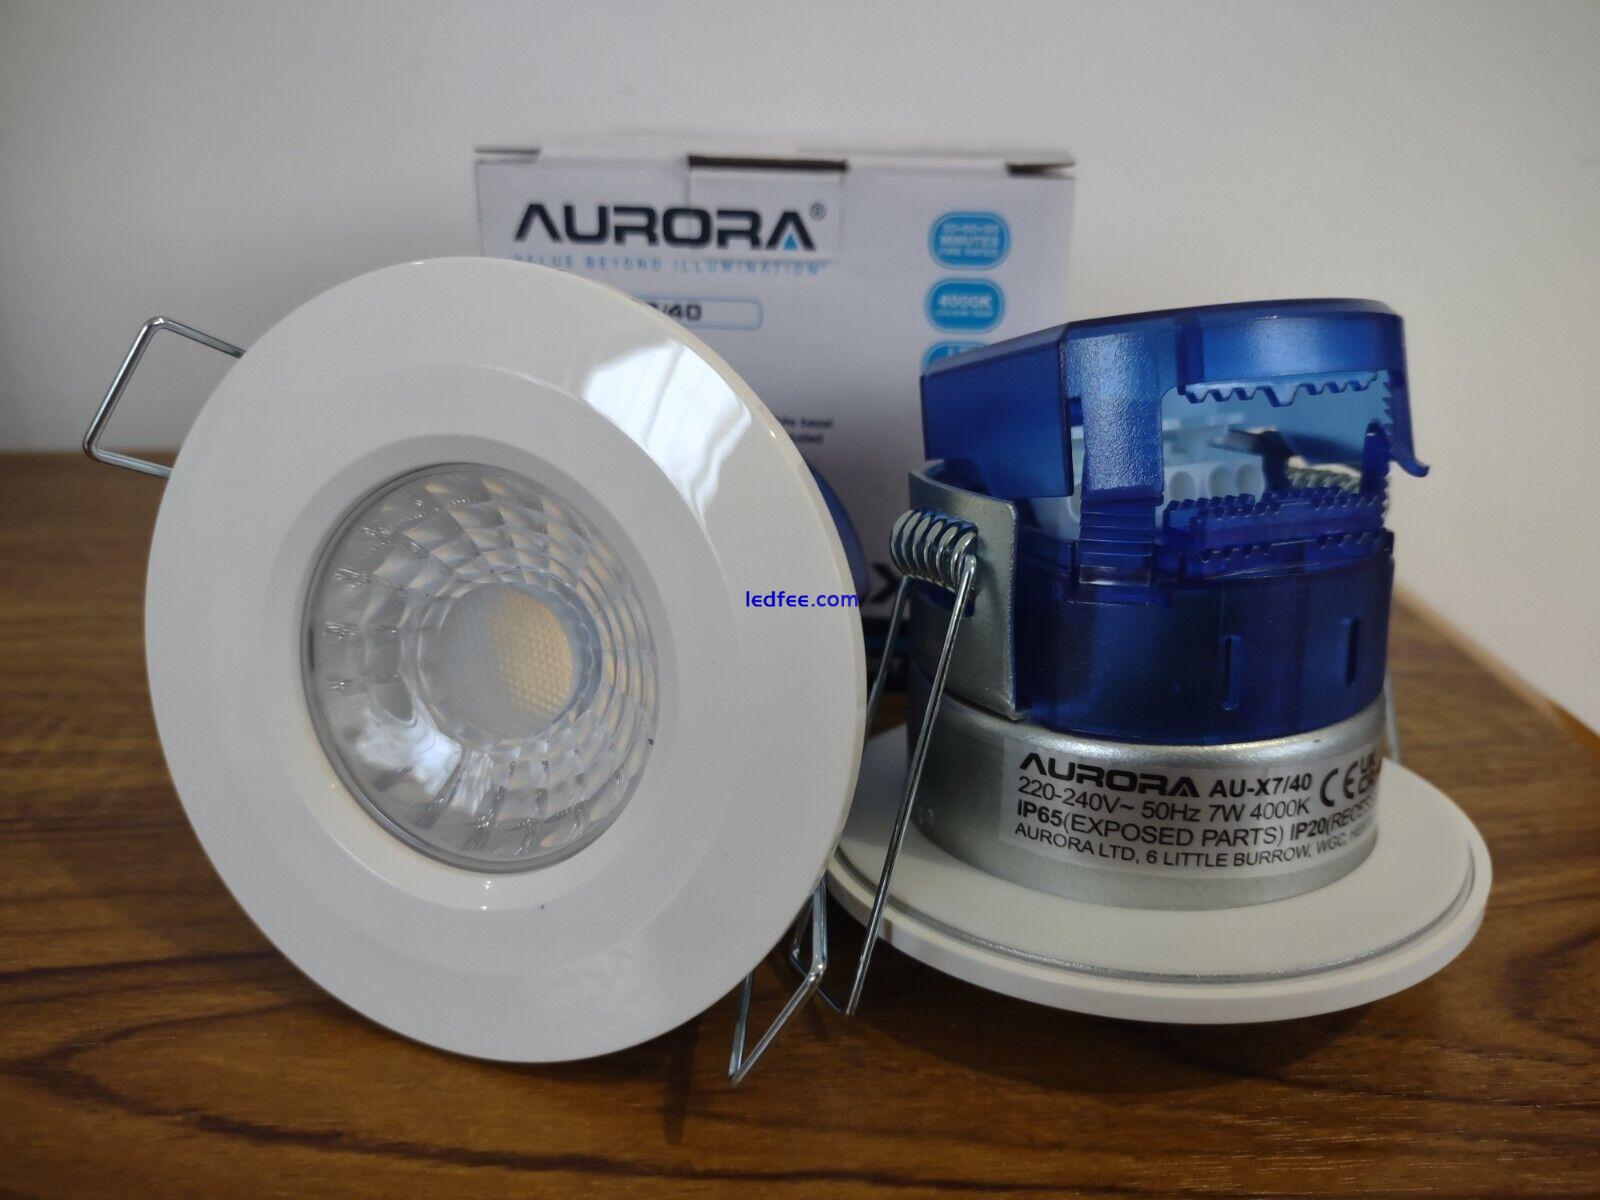 10x LED Downlight 7w Cool White 4000k Fire Rated IP65 240v Ceiling Aurora X7 2 